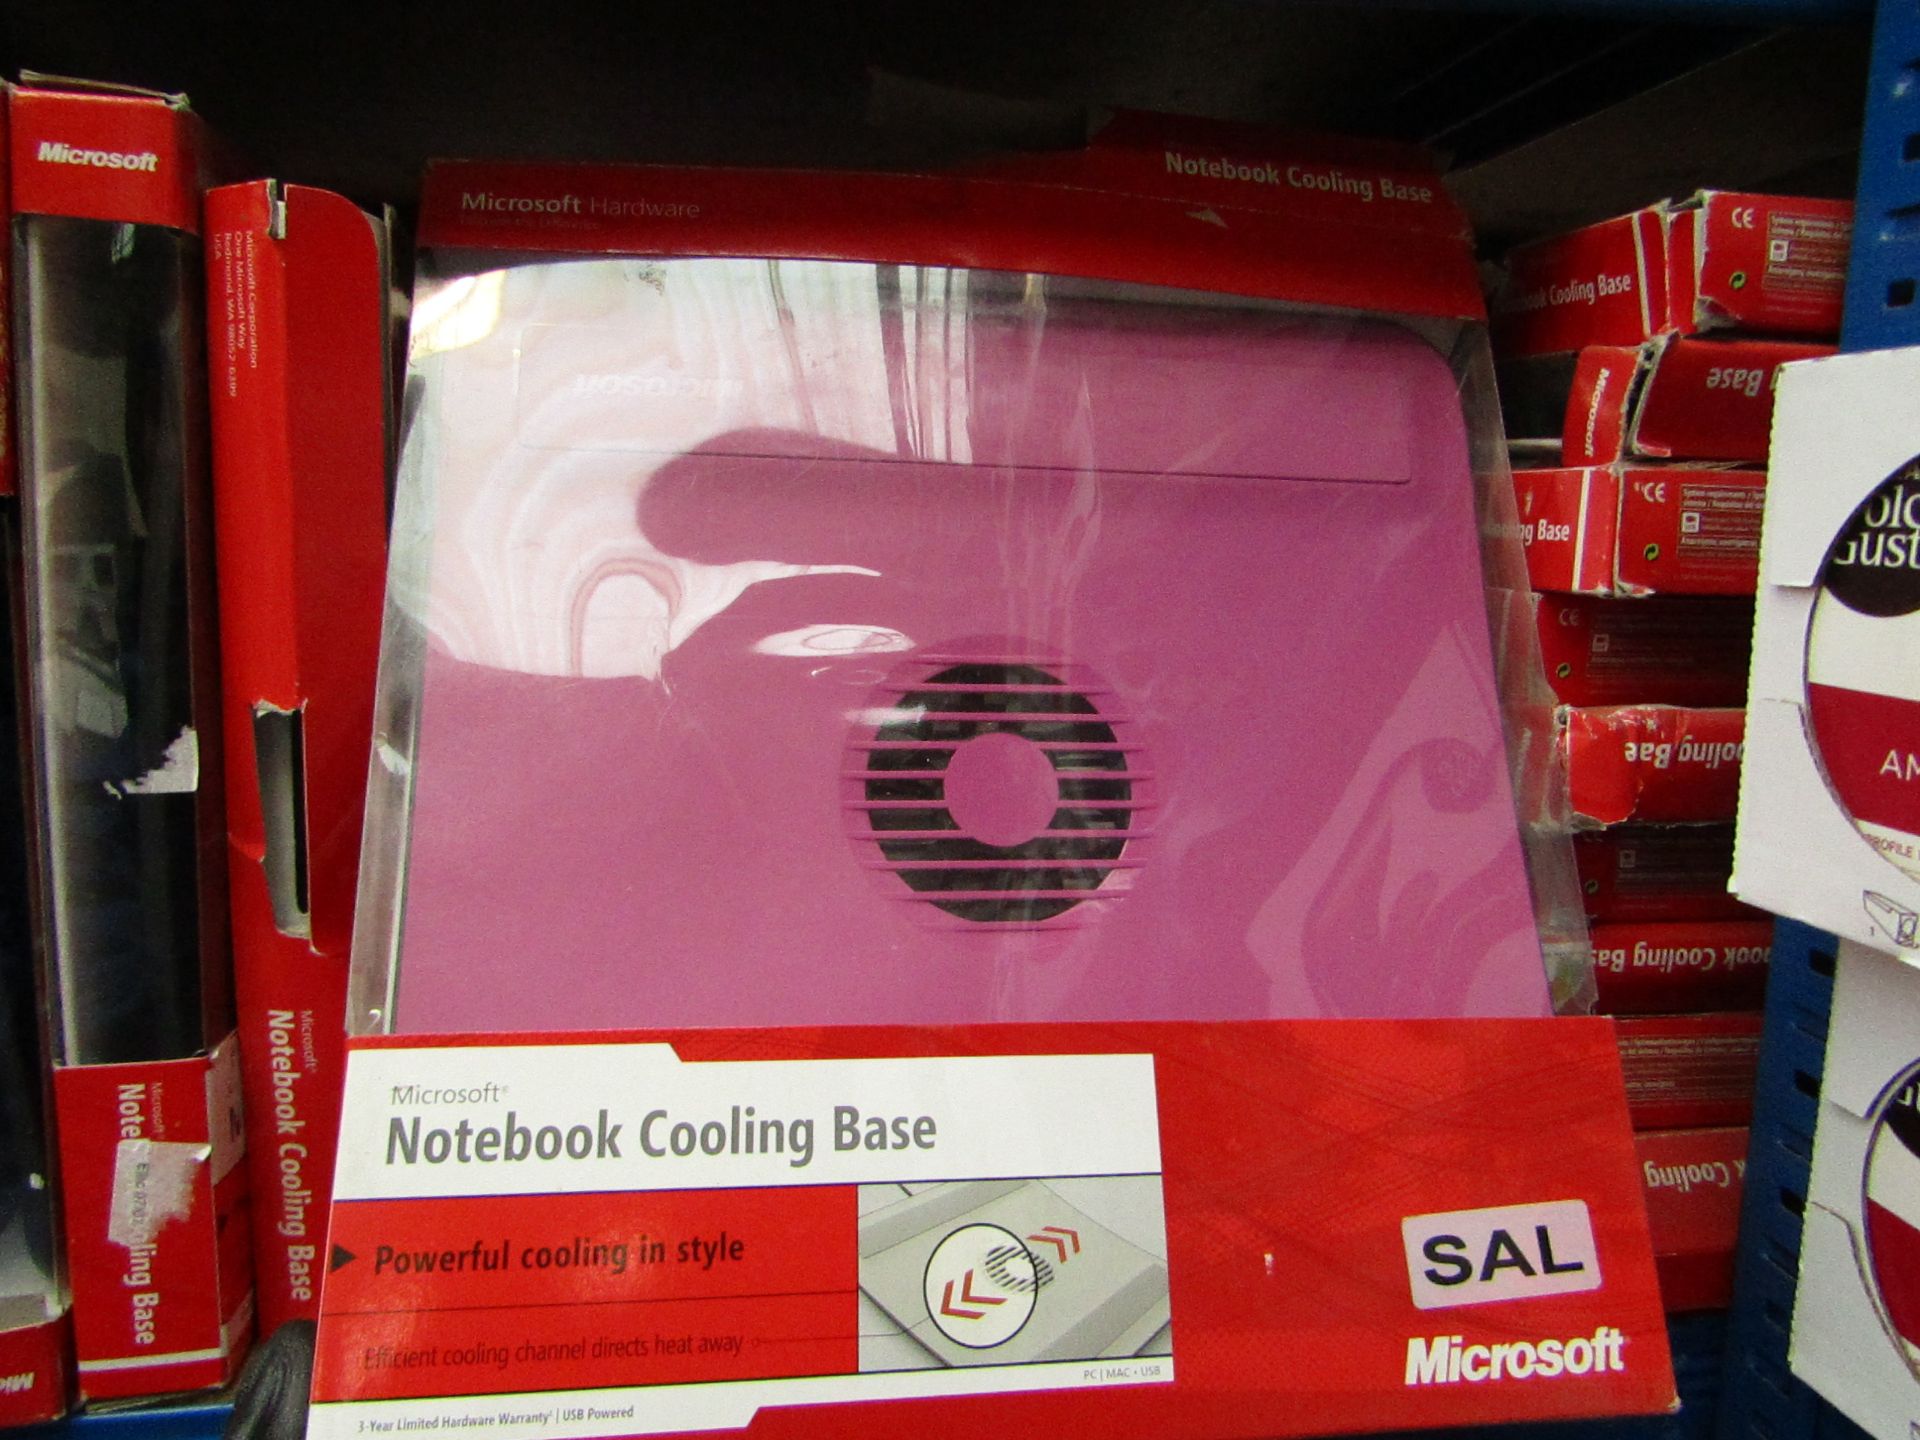 Microsoft - NoteBook Cooling Base - unchecked and boxed.